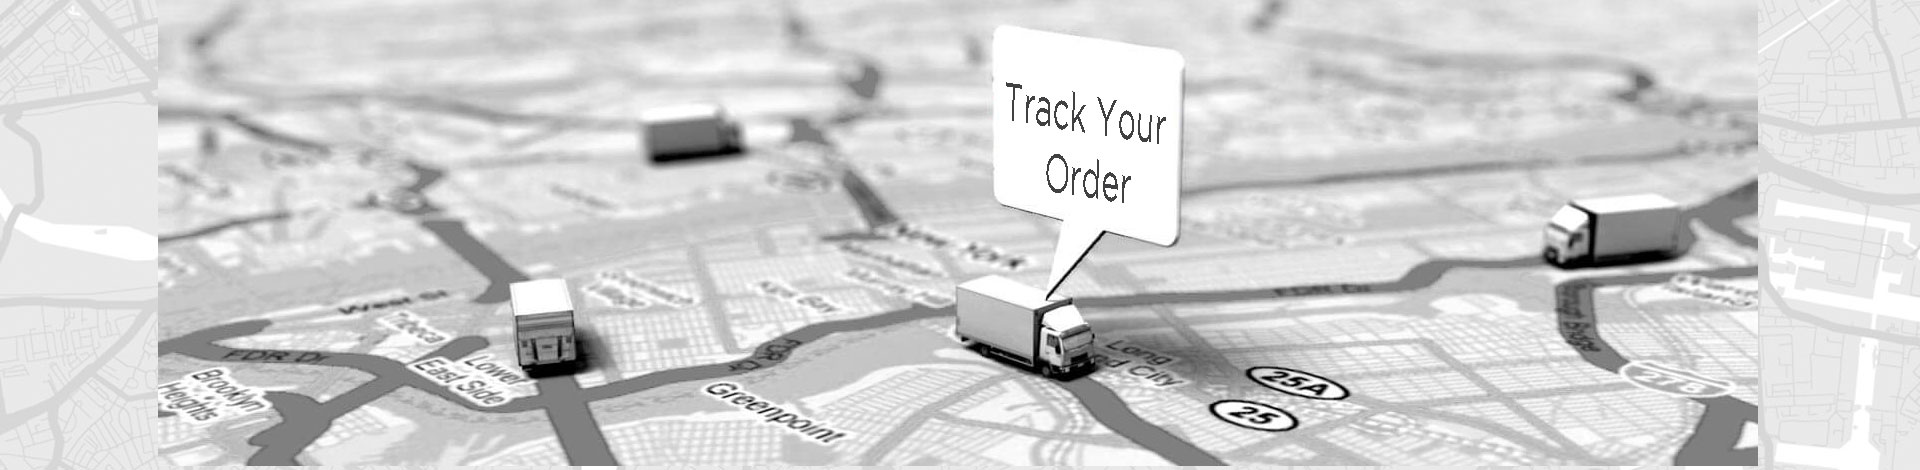 track-your-order